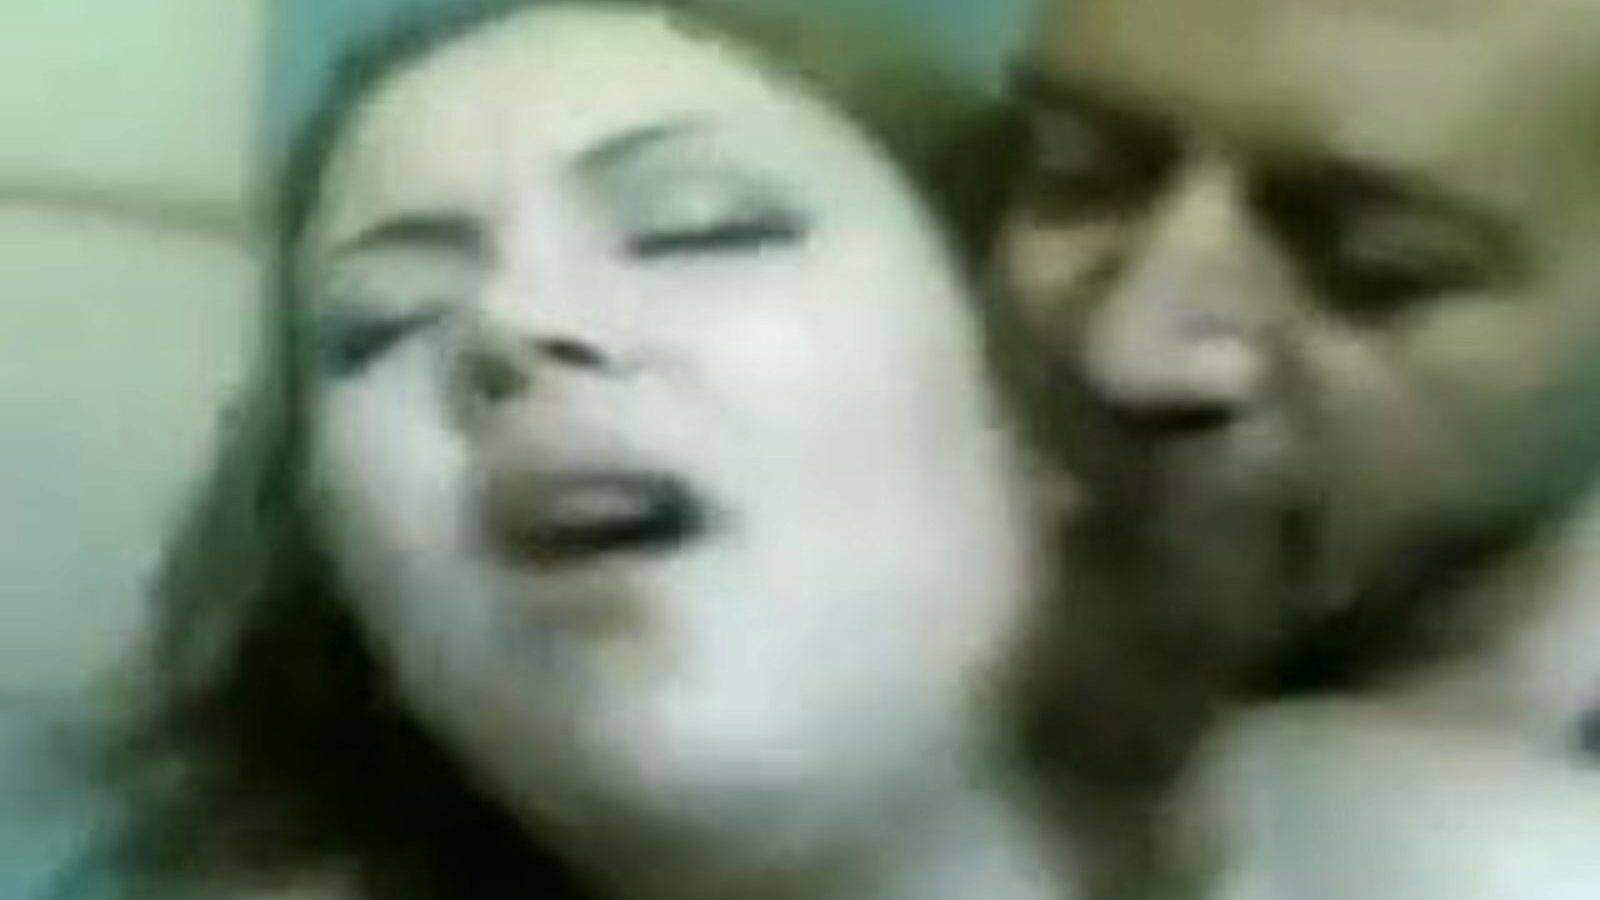 madame lily: ingyenes hatvankilenc pornó videó 07 - xhamster watch madame lily tube love-clip for free-for-all on xhamster, with superior bevy of egyptian arab, 69 & big ass porn video episodes